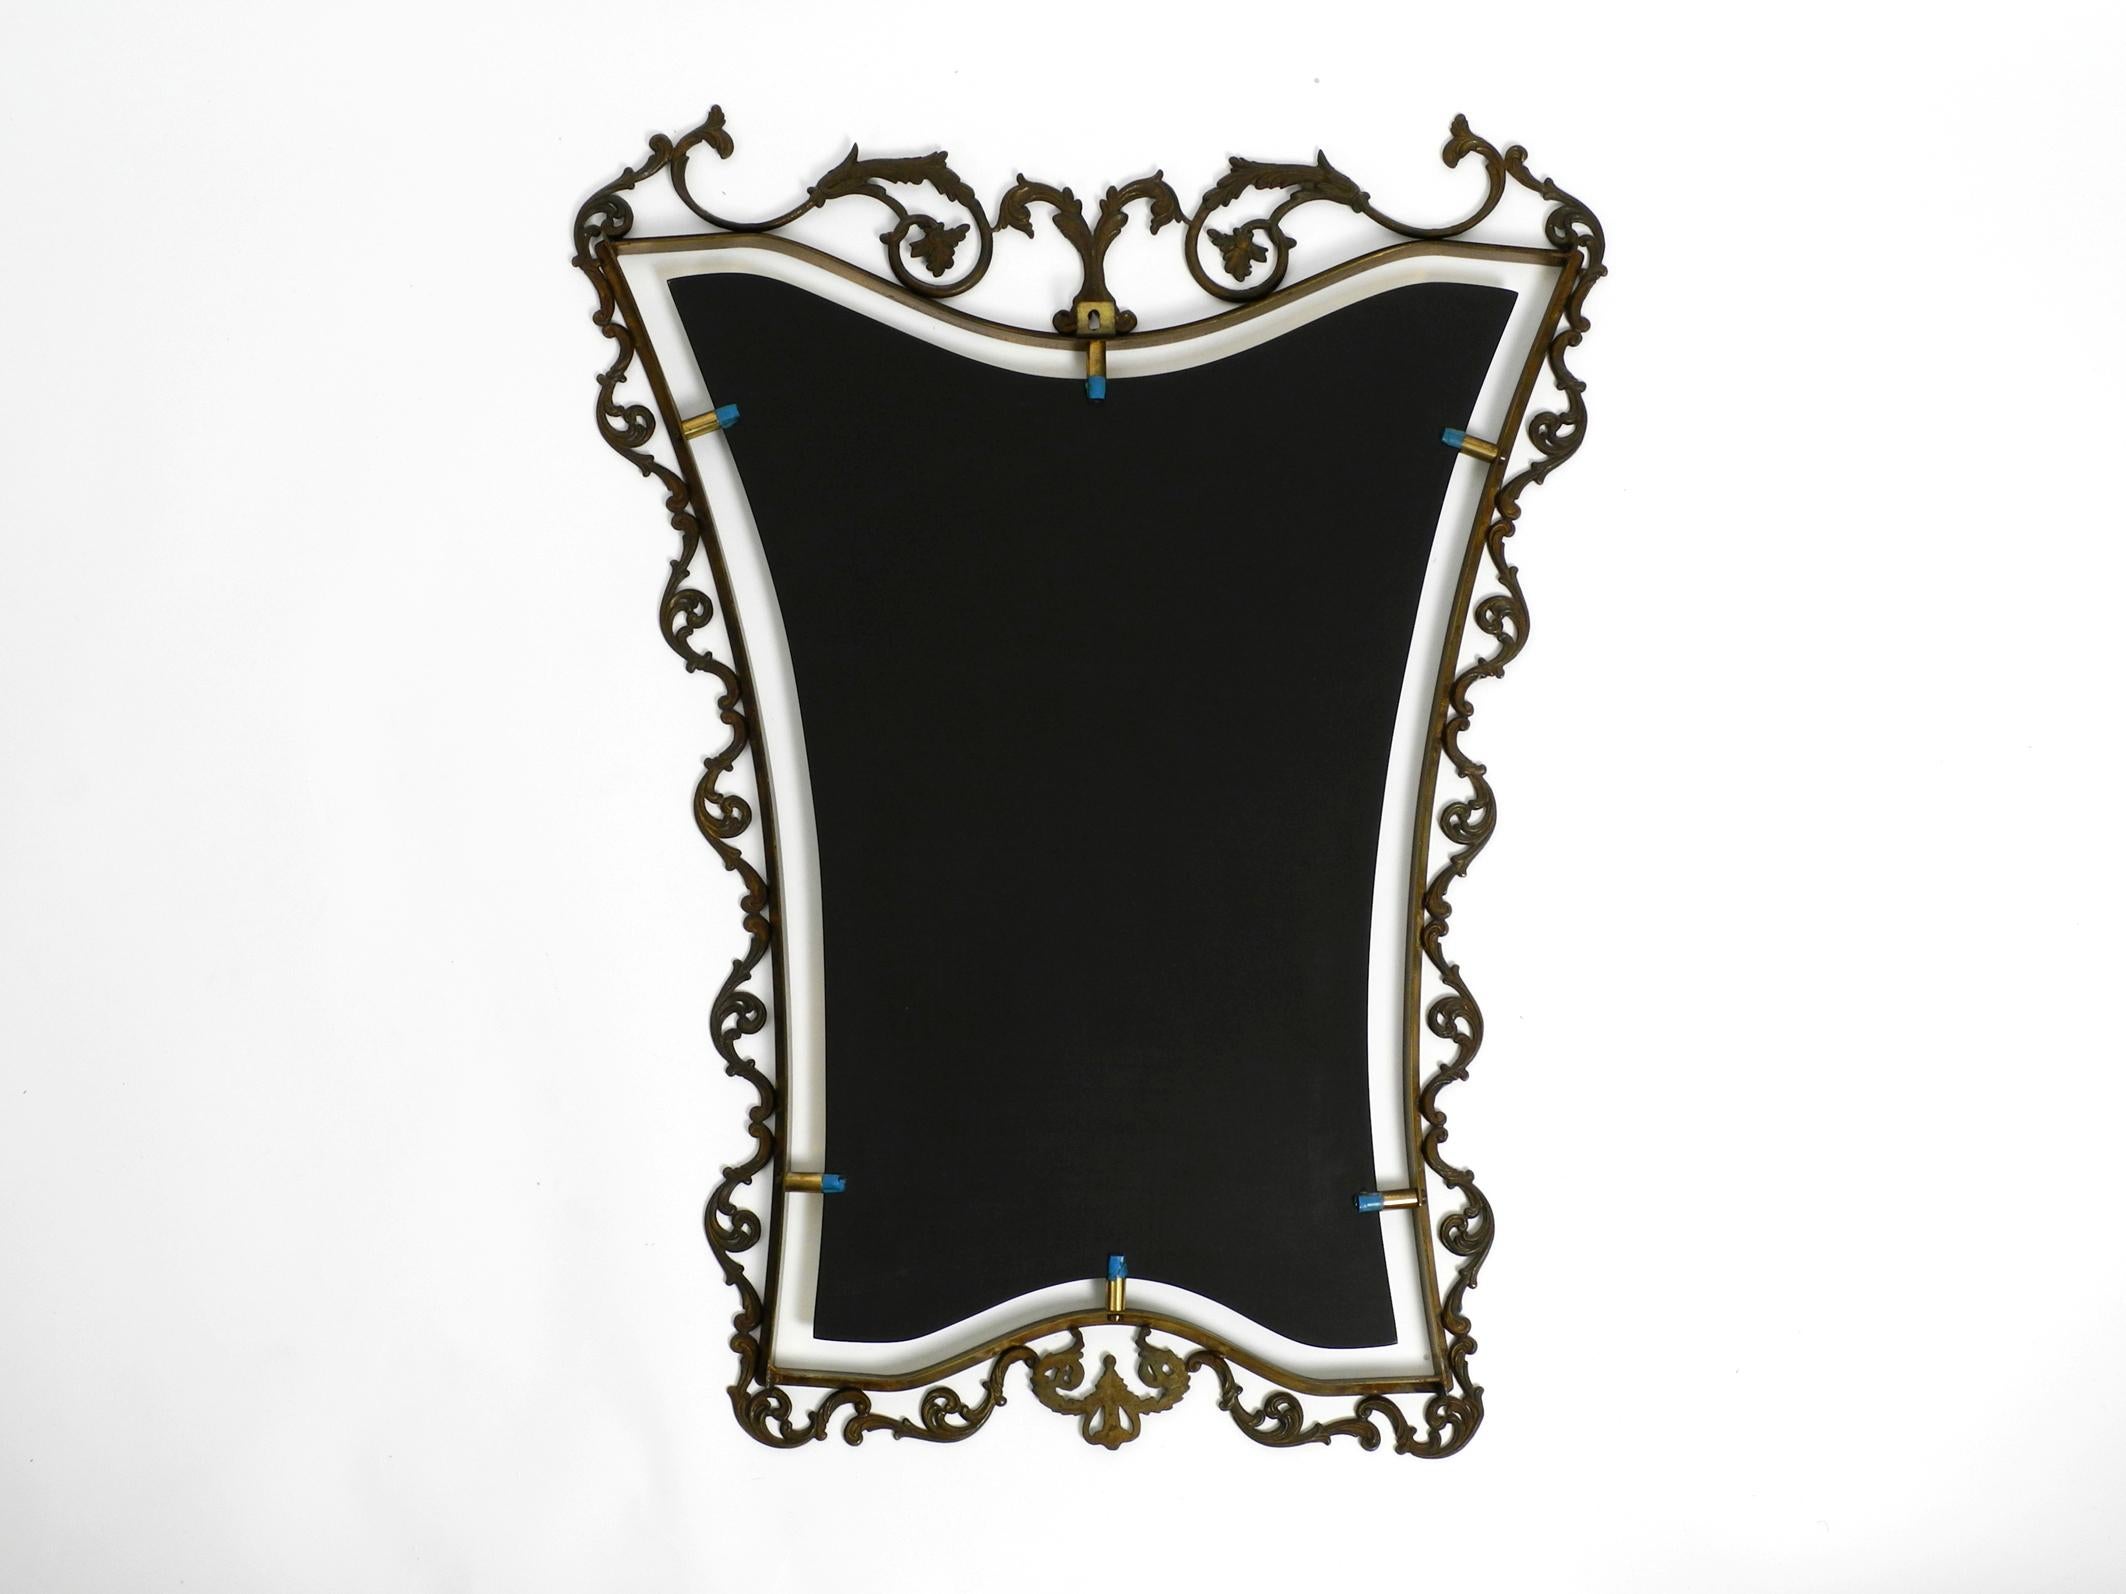 Extraordinary Large, Heavy Italian Mid Century Wall Mirror with an Ornate Brass For Sale 5